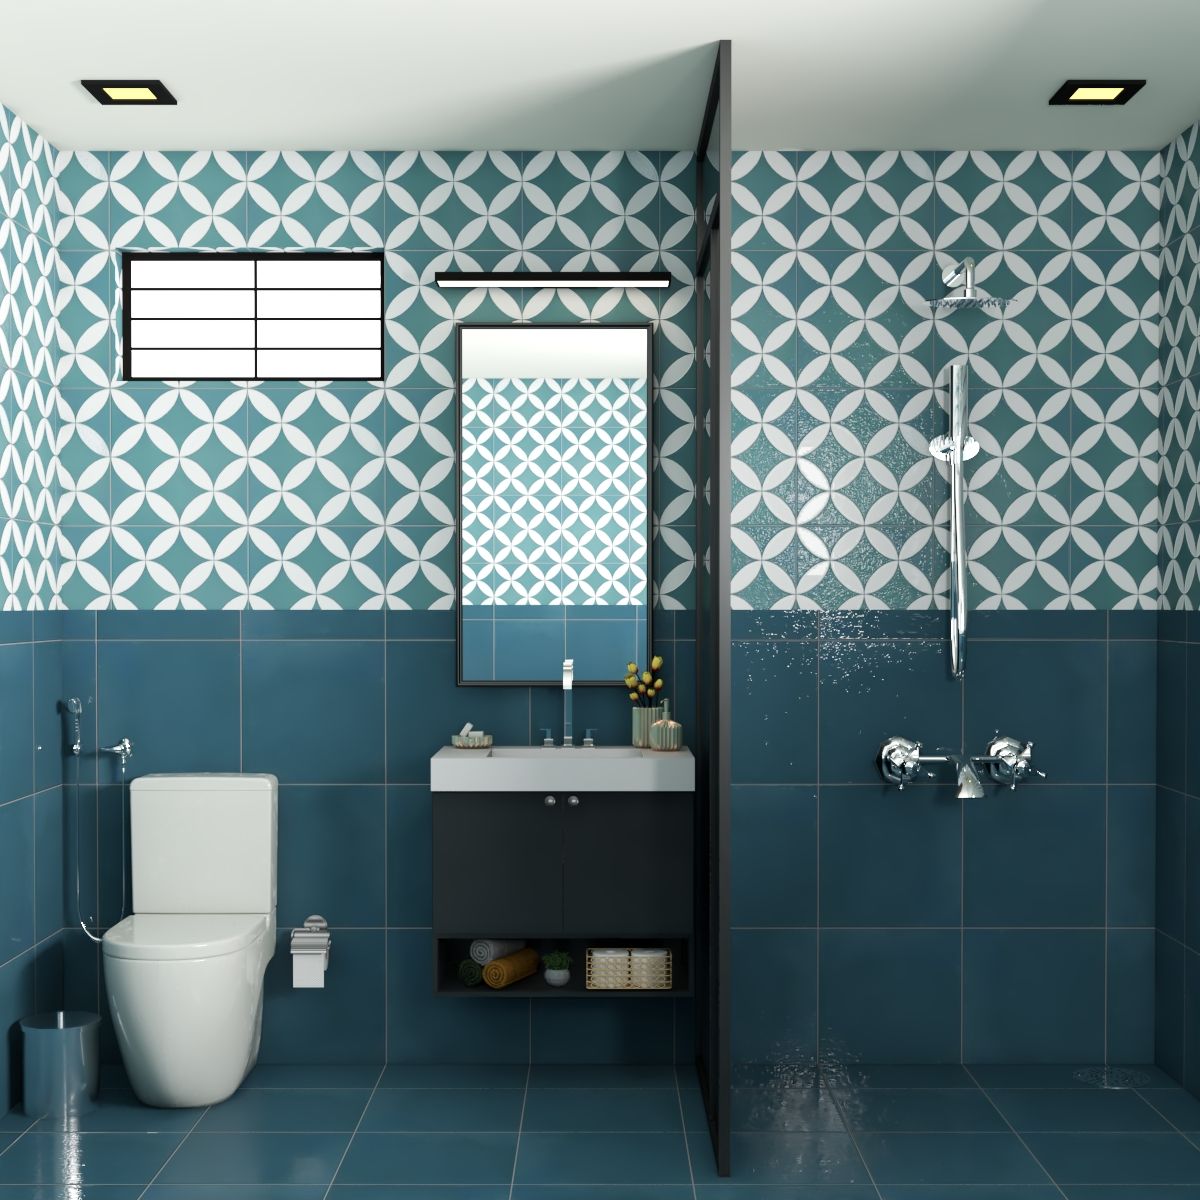 Blue-Themed Modern Bathroom Design With Cement Wall Tiles | Livspace